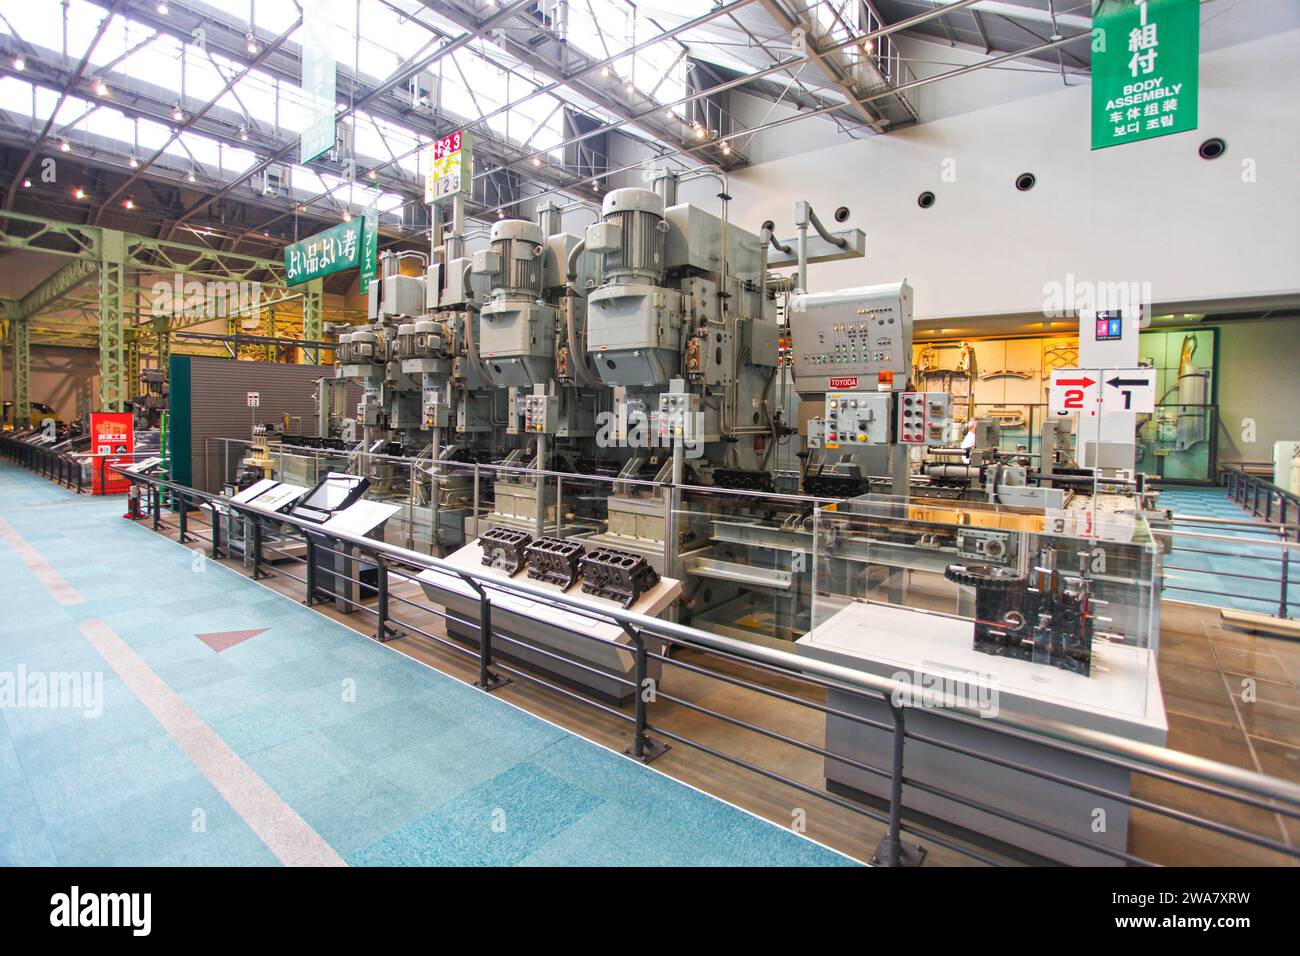 Inside the Toyota Commemorative Museum of Industry and Technology in Nagoya, Japan.with heavy machinery used in car manufacture in the past. Stock Photo